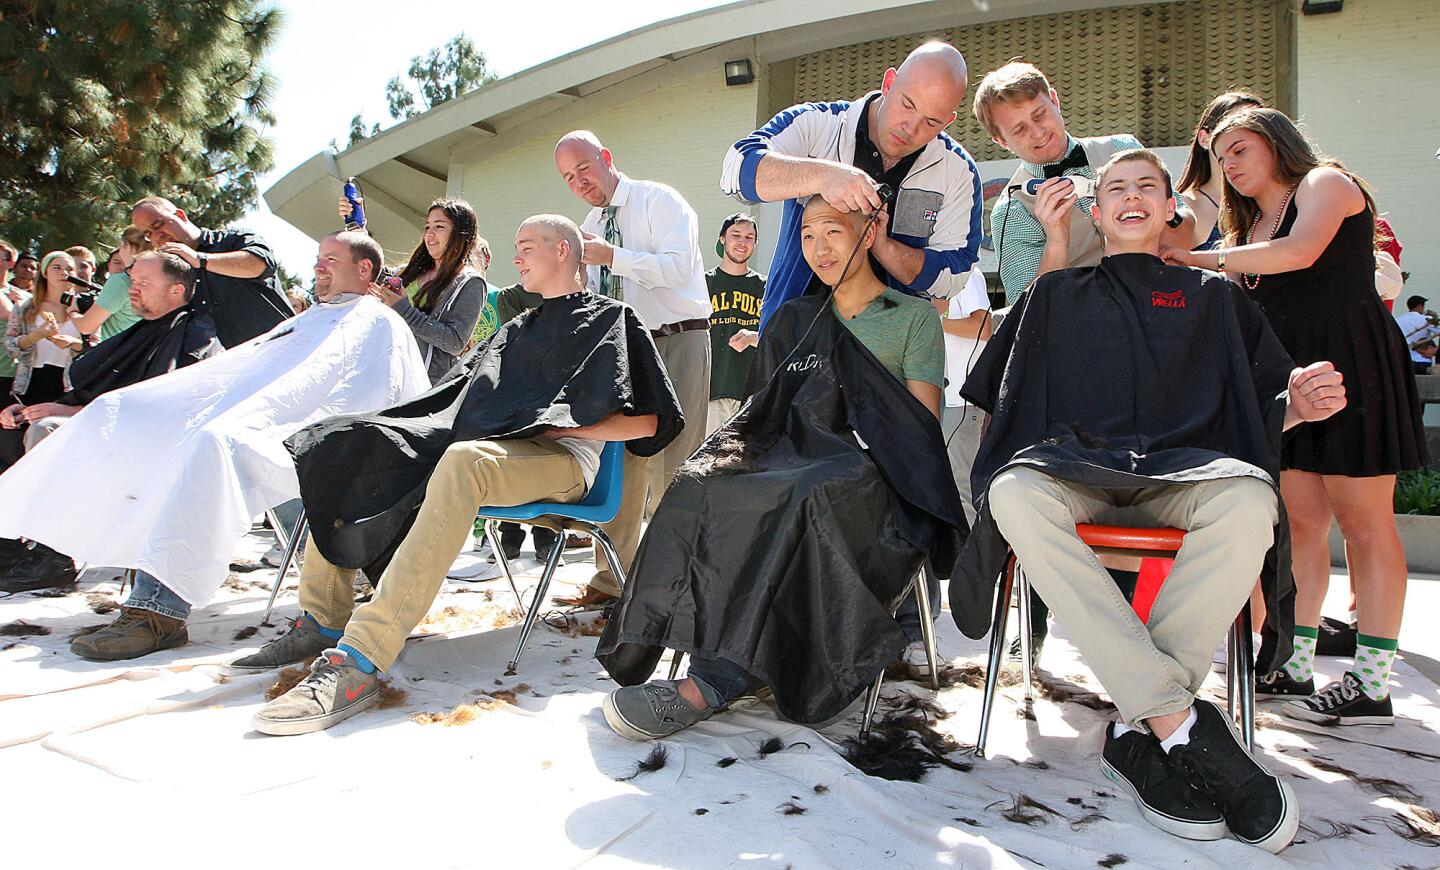 Teachers and students at LCHS shaved their heads for St Baldrick's Day on Monday, March 17, 2014, in support of pediatric cancer awareness and LCHS student Melissa Leo, who was recently diagnosed with leukemia.